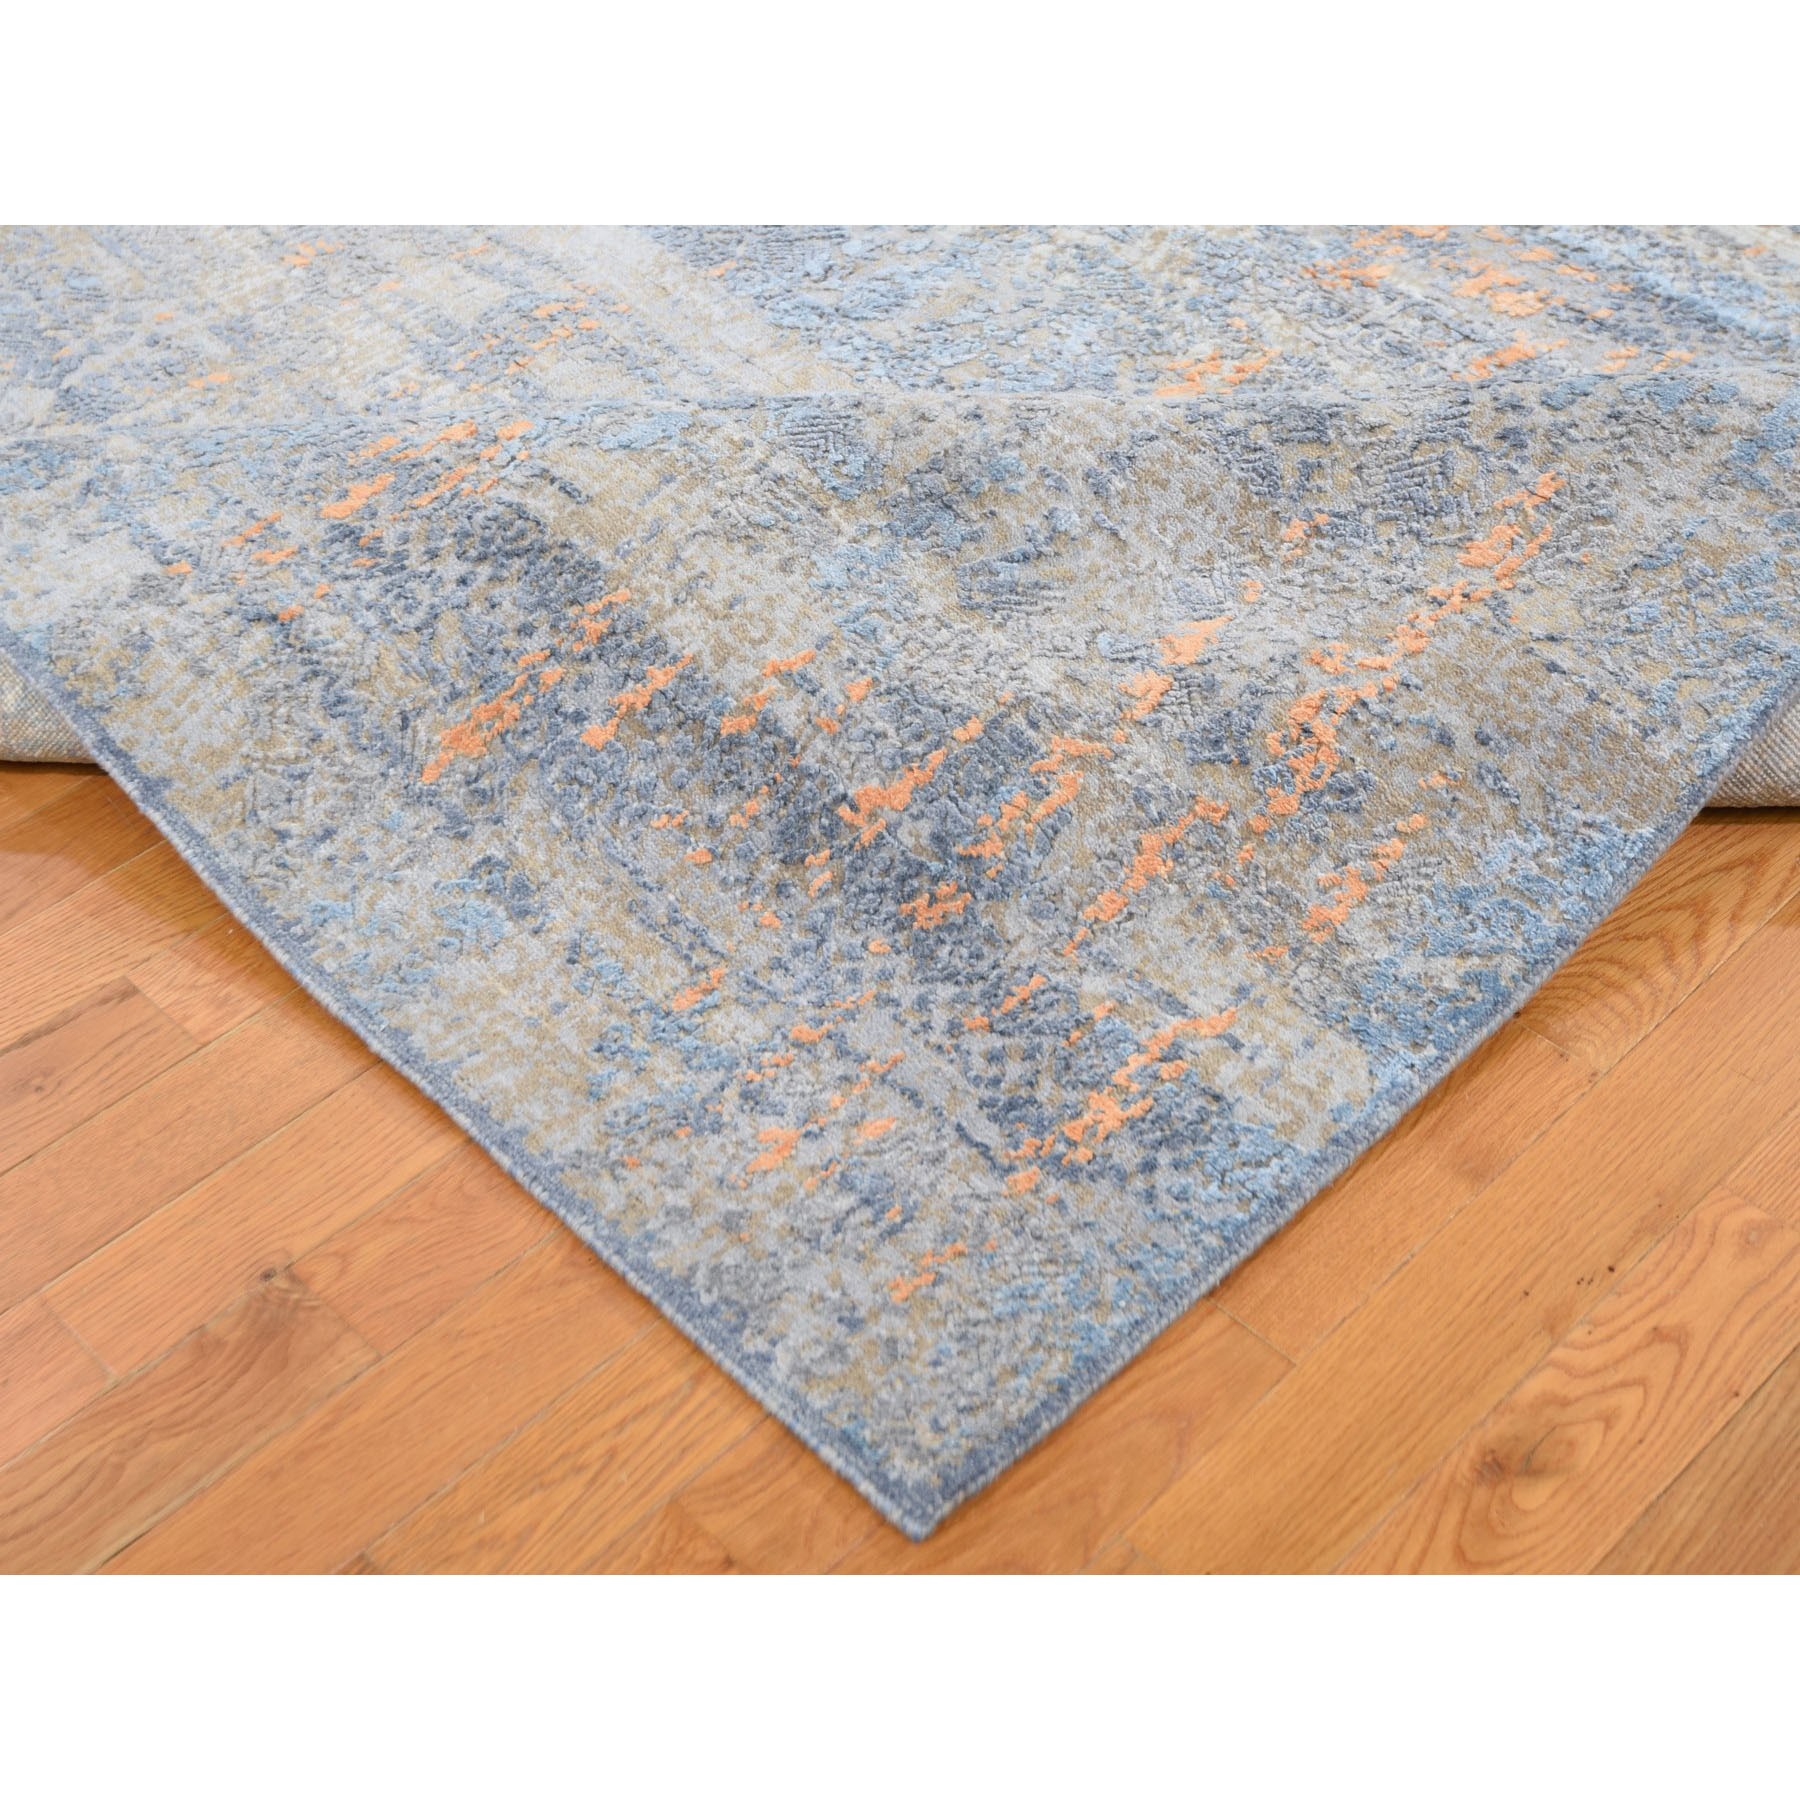 8-x10-  Light Blue Silk With Textured Wool Abstract Dripping Design Hand Knotted Oriental Rug 